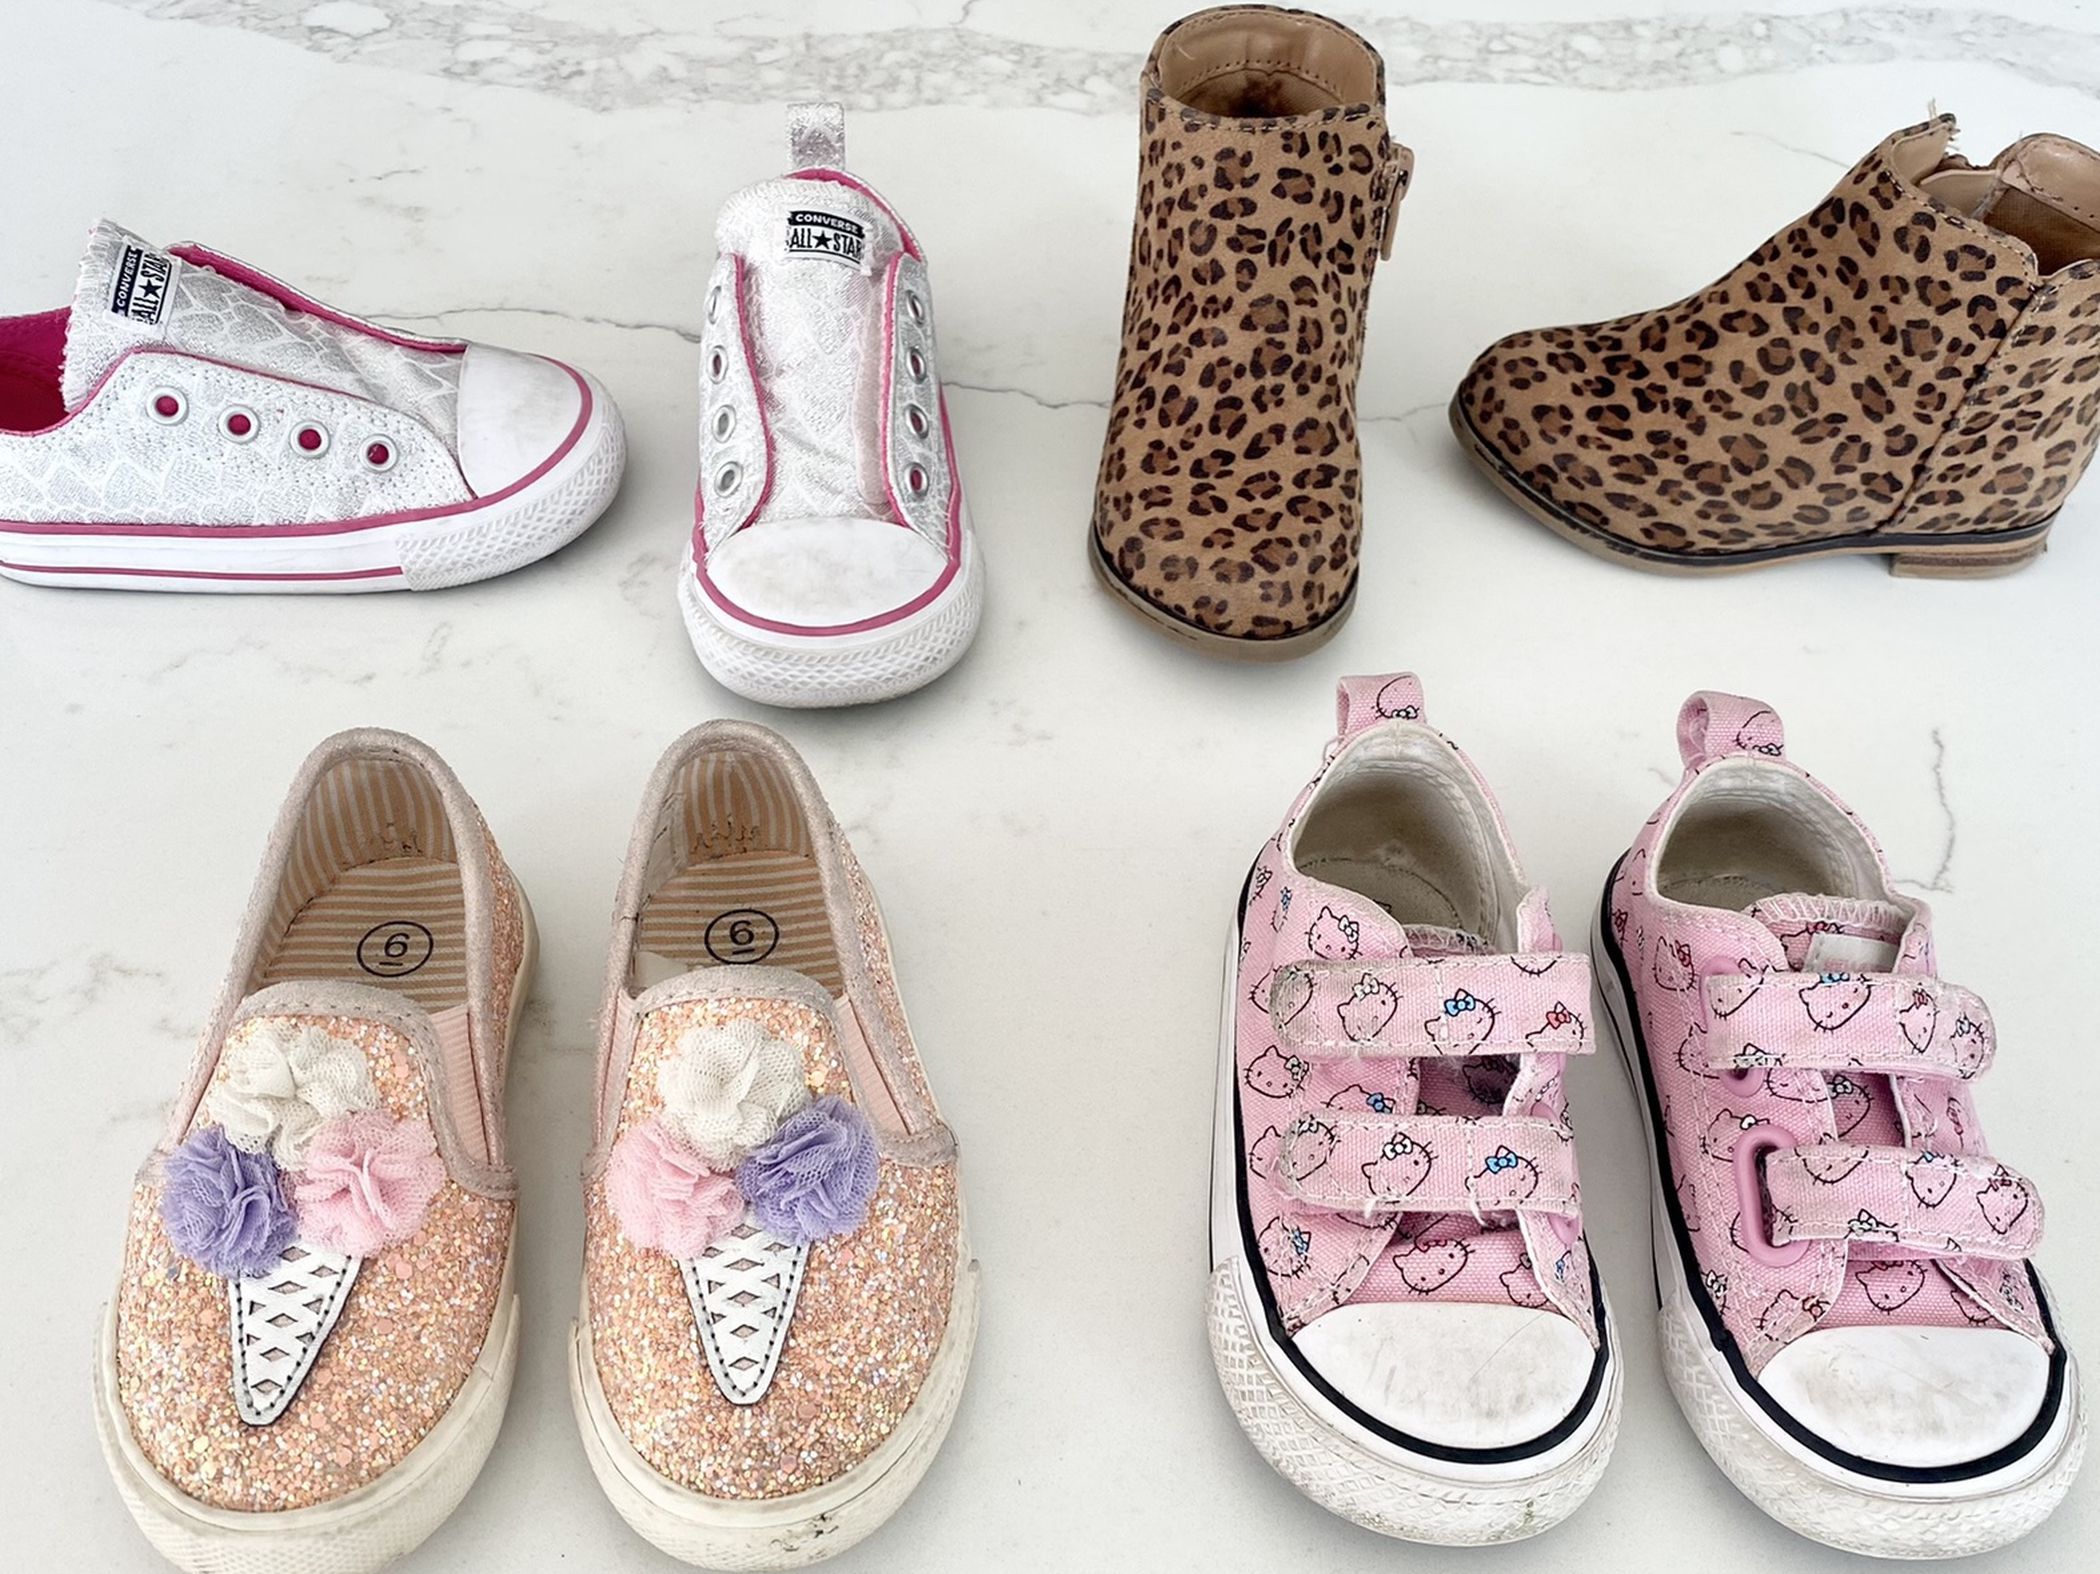 Toddler Shoes - 2 pages